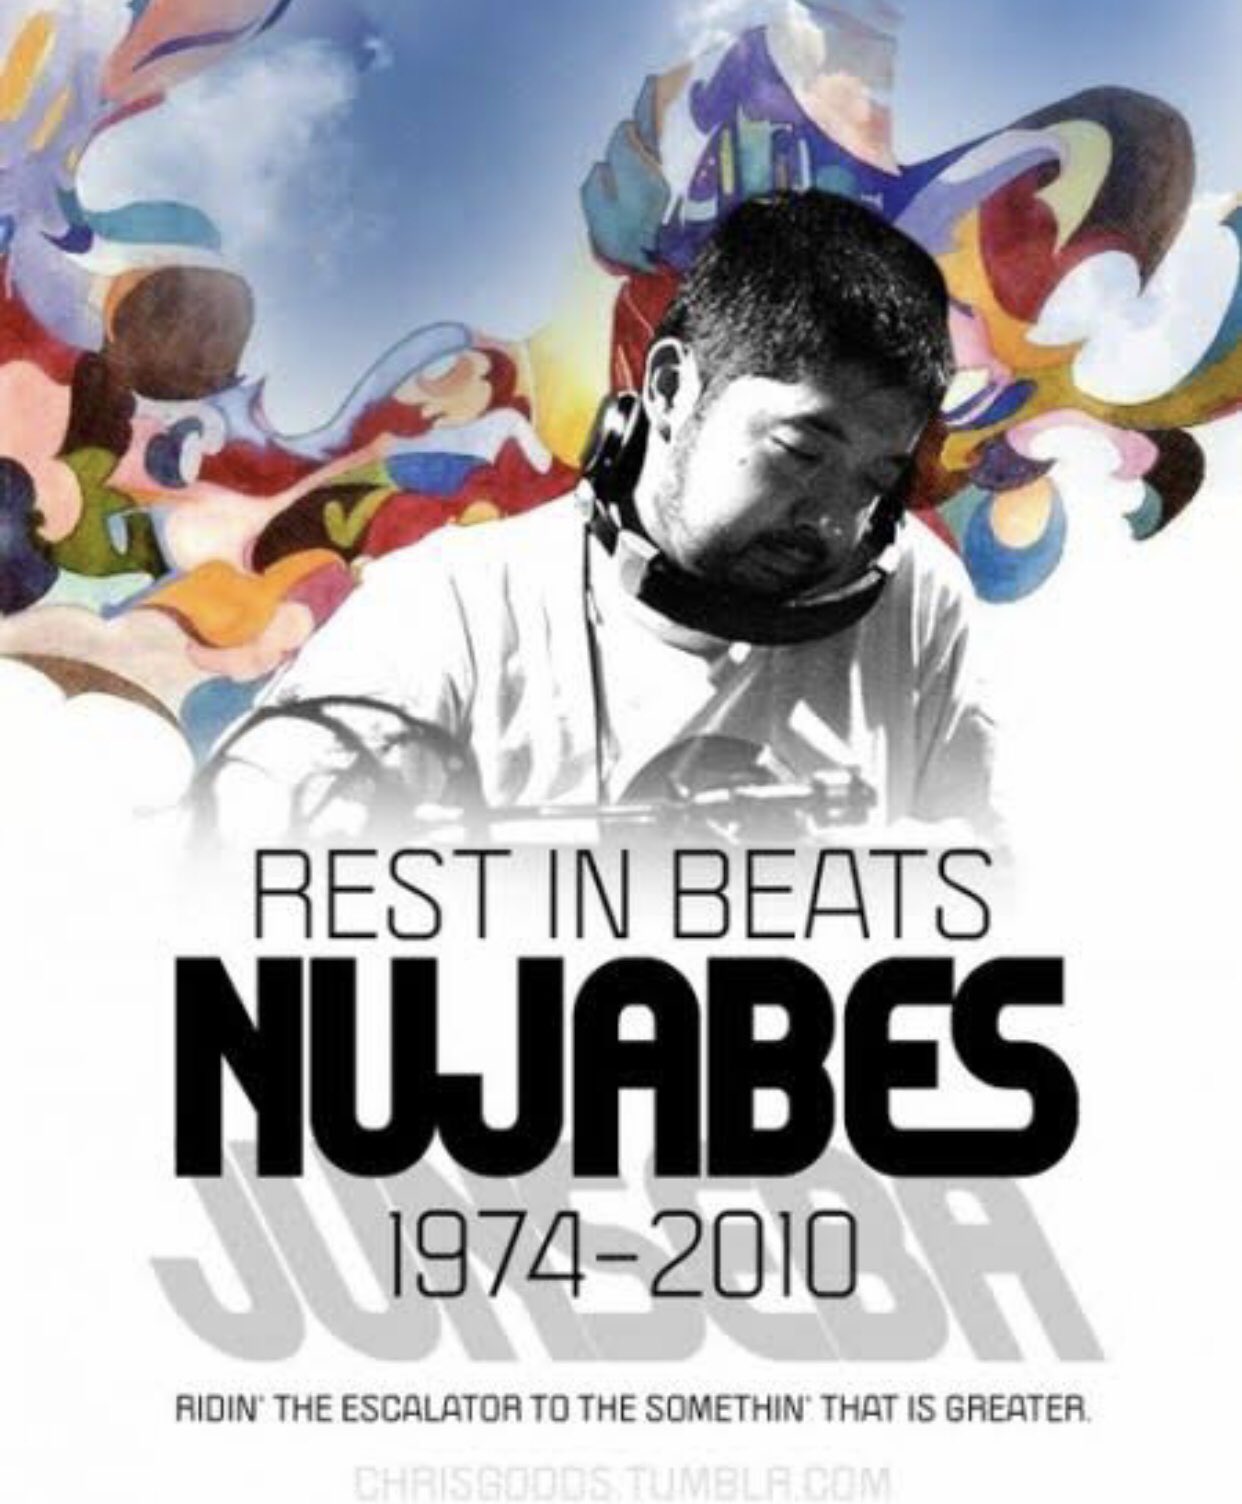 Jojozoey Nujabes Luv Sic Pt 3 Shing02 Extended Version T Co W72xlvgiud Nujabes Sebajun Nujabes Nujabesluvsic3 Hideout Trackmaker Hiphop Chillout サムライチャンプルー Hideoutproductions Restinpeace 1974 10 Nujabes